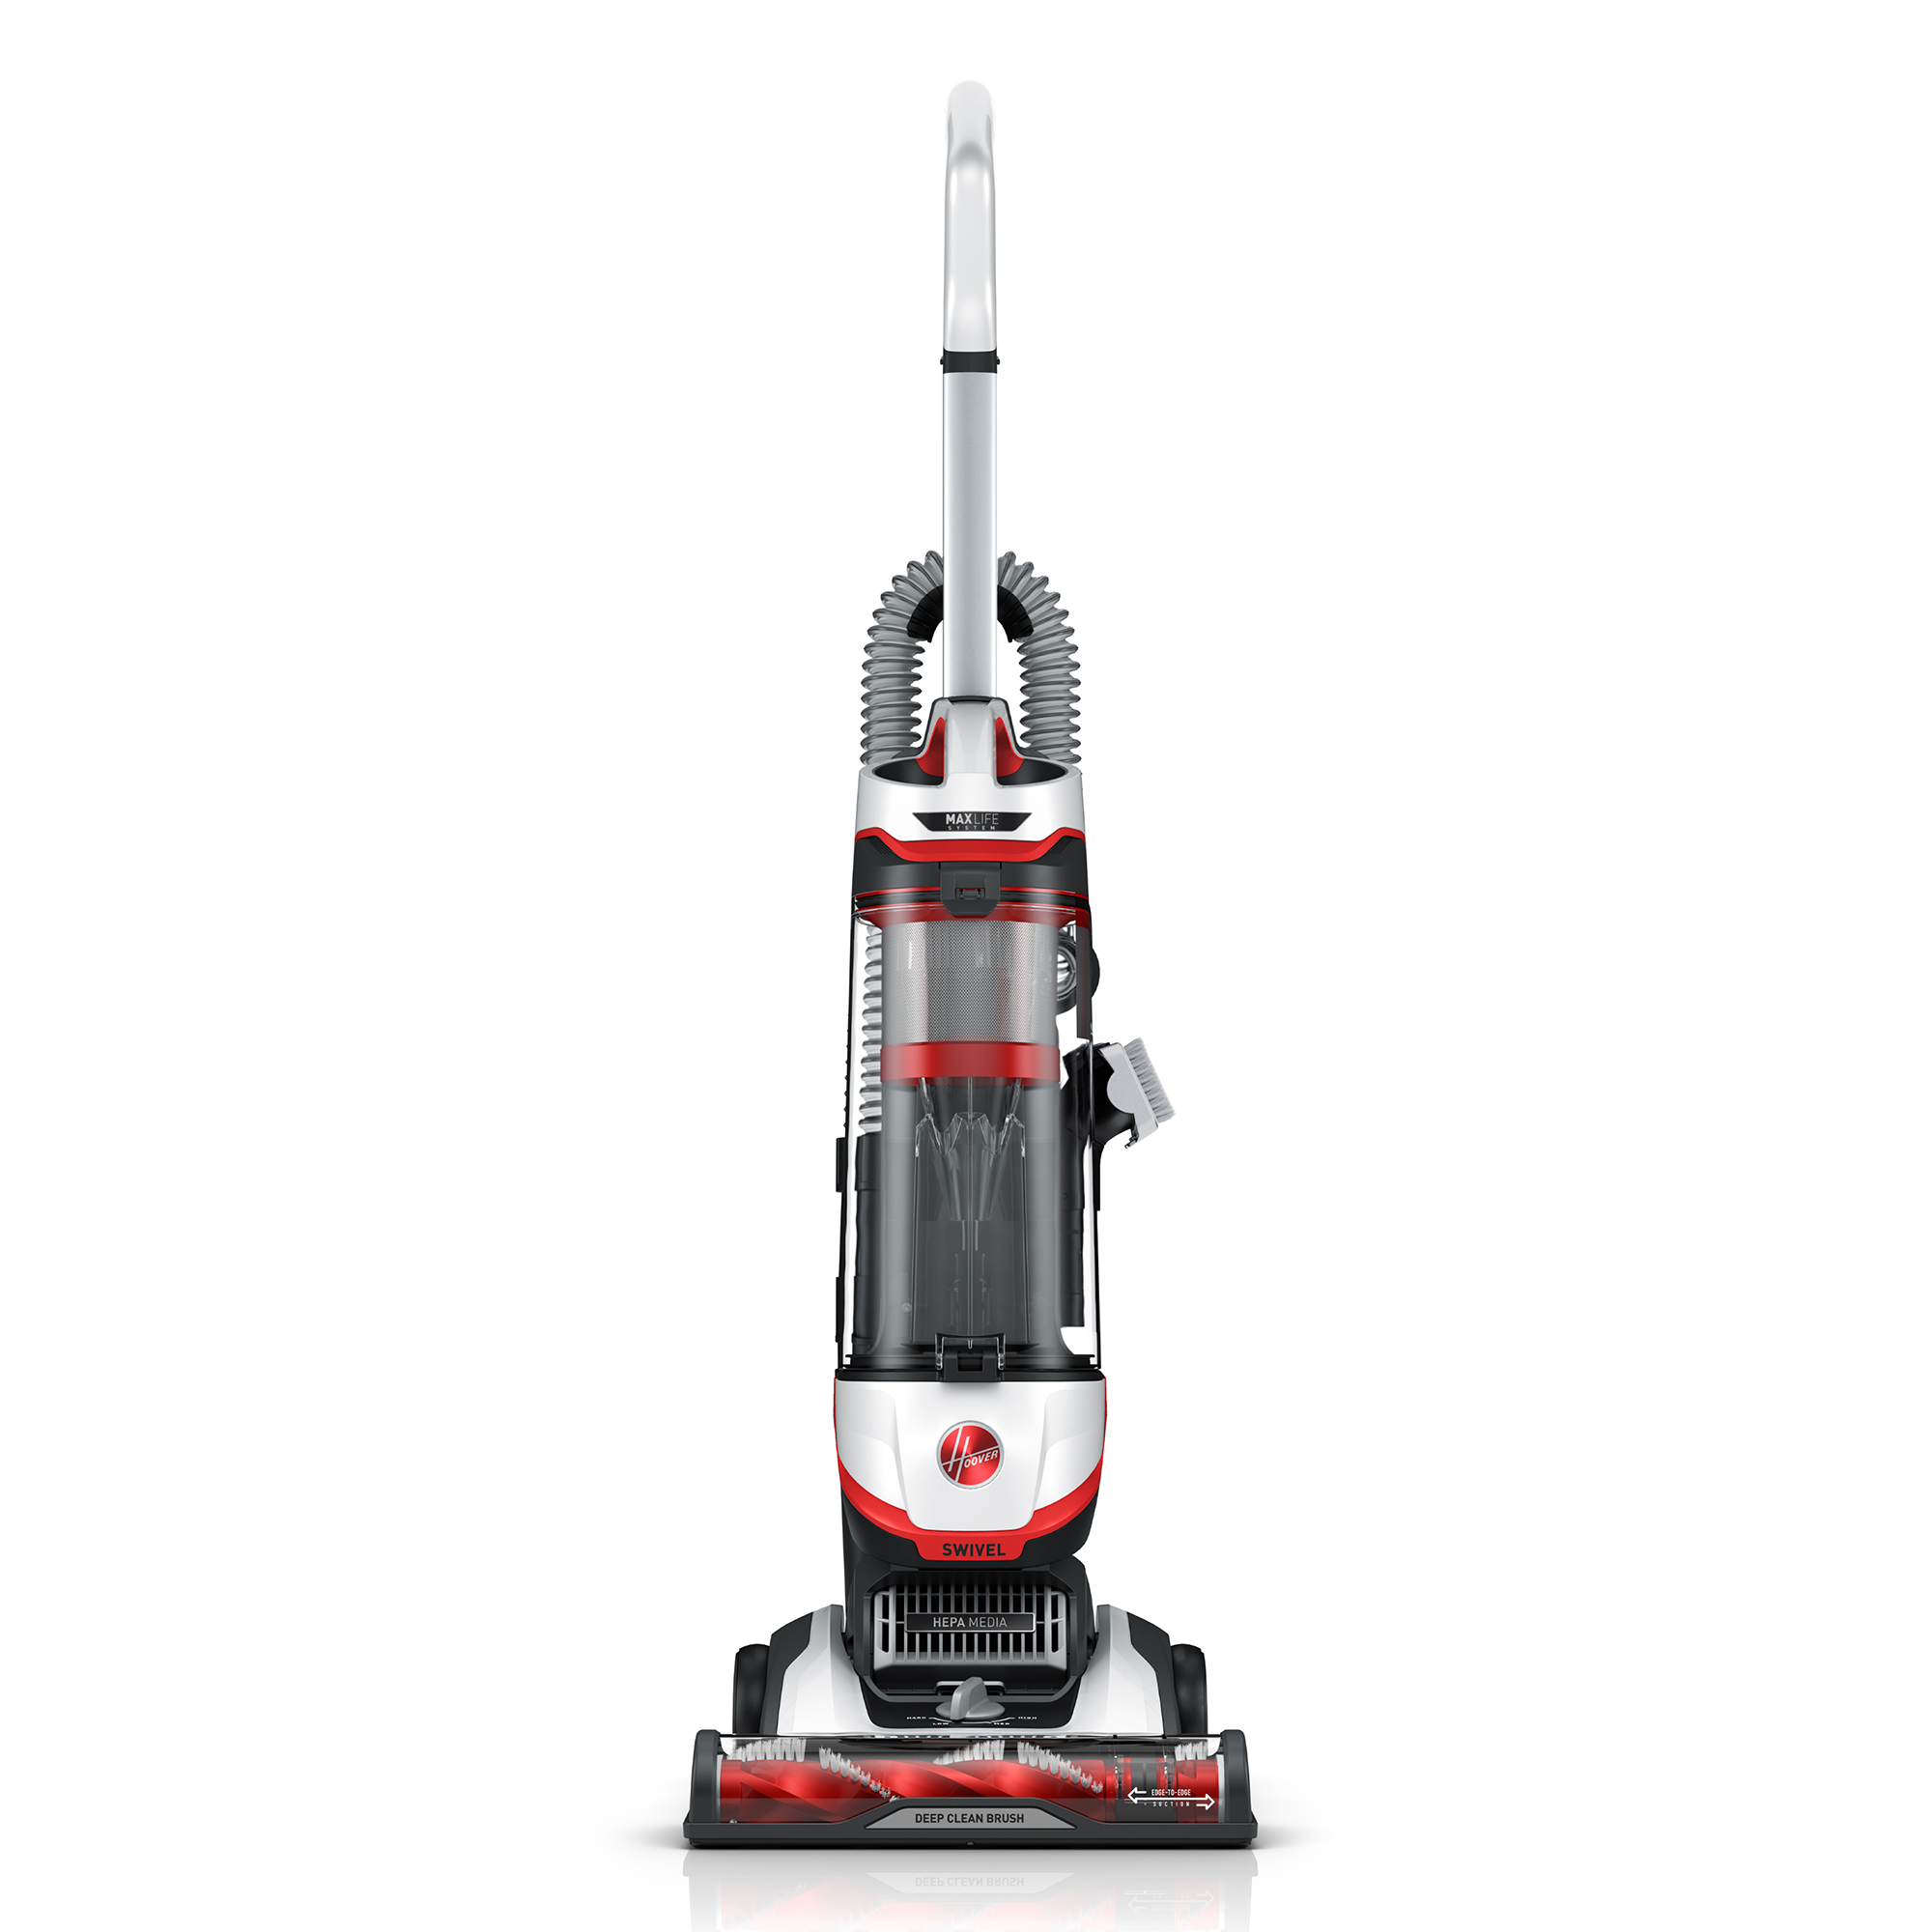 Hoover MAXLife PowerDrive Elite High Performance Swivel XL Bagless Upright Vacuum Cleaner with HEPA Media Filtration, UH75110, New - image 1 of 13